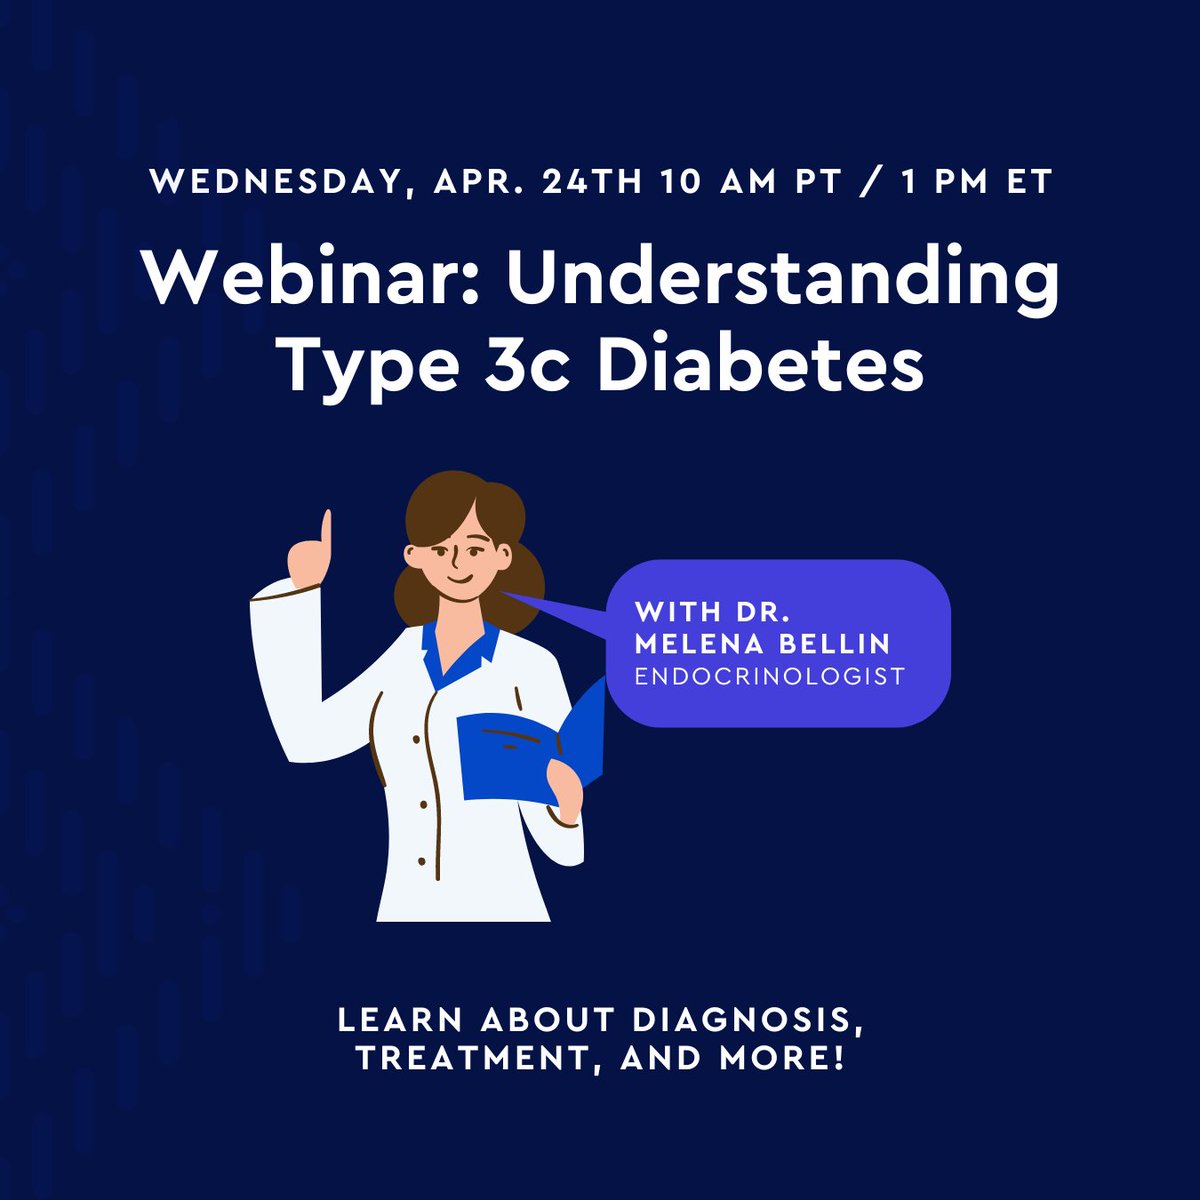 TOMORROW: Join us for a free webinar on Type 3c Diabetes with Dr. Bellin. A perfect opportunity for patients and caregivers to learn from an expert in the field. Register now if you haven't already! 💙

us02web.zoom.us/webinar/regist…

#DiabetesAwareness #GITwitter